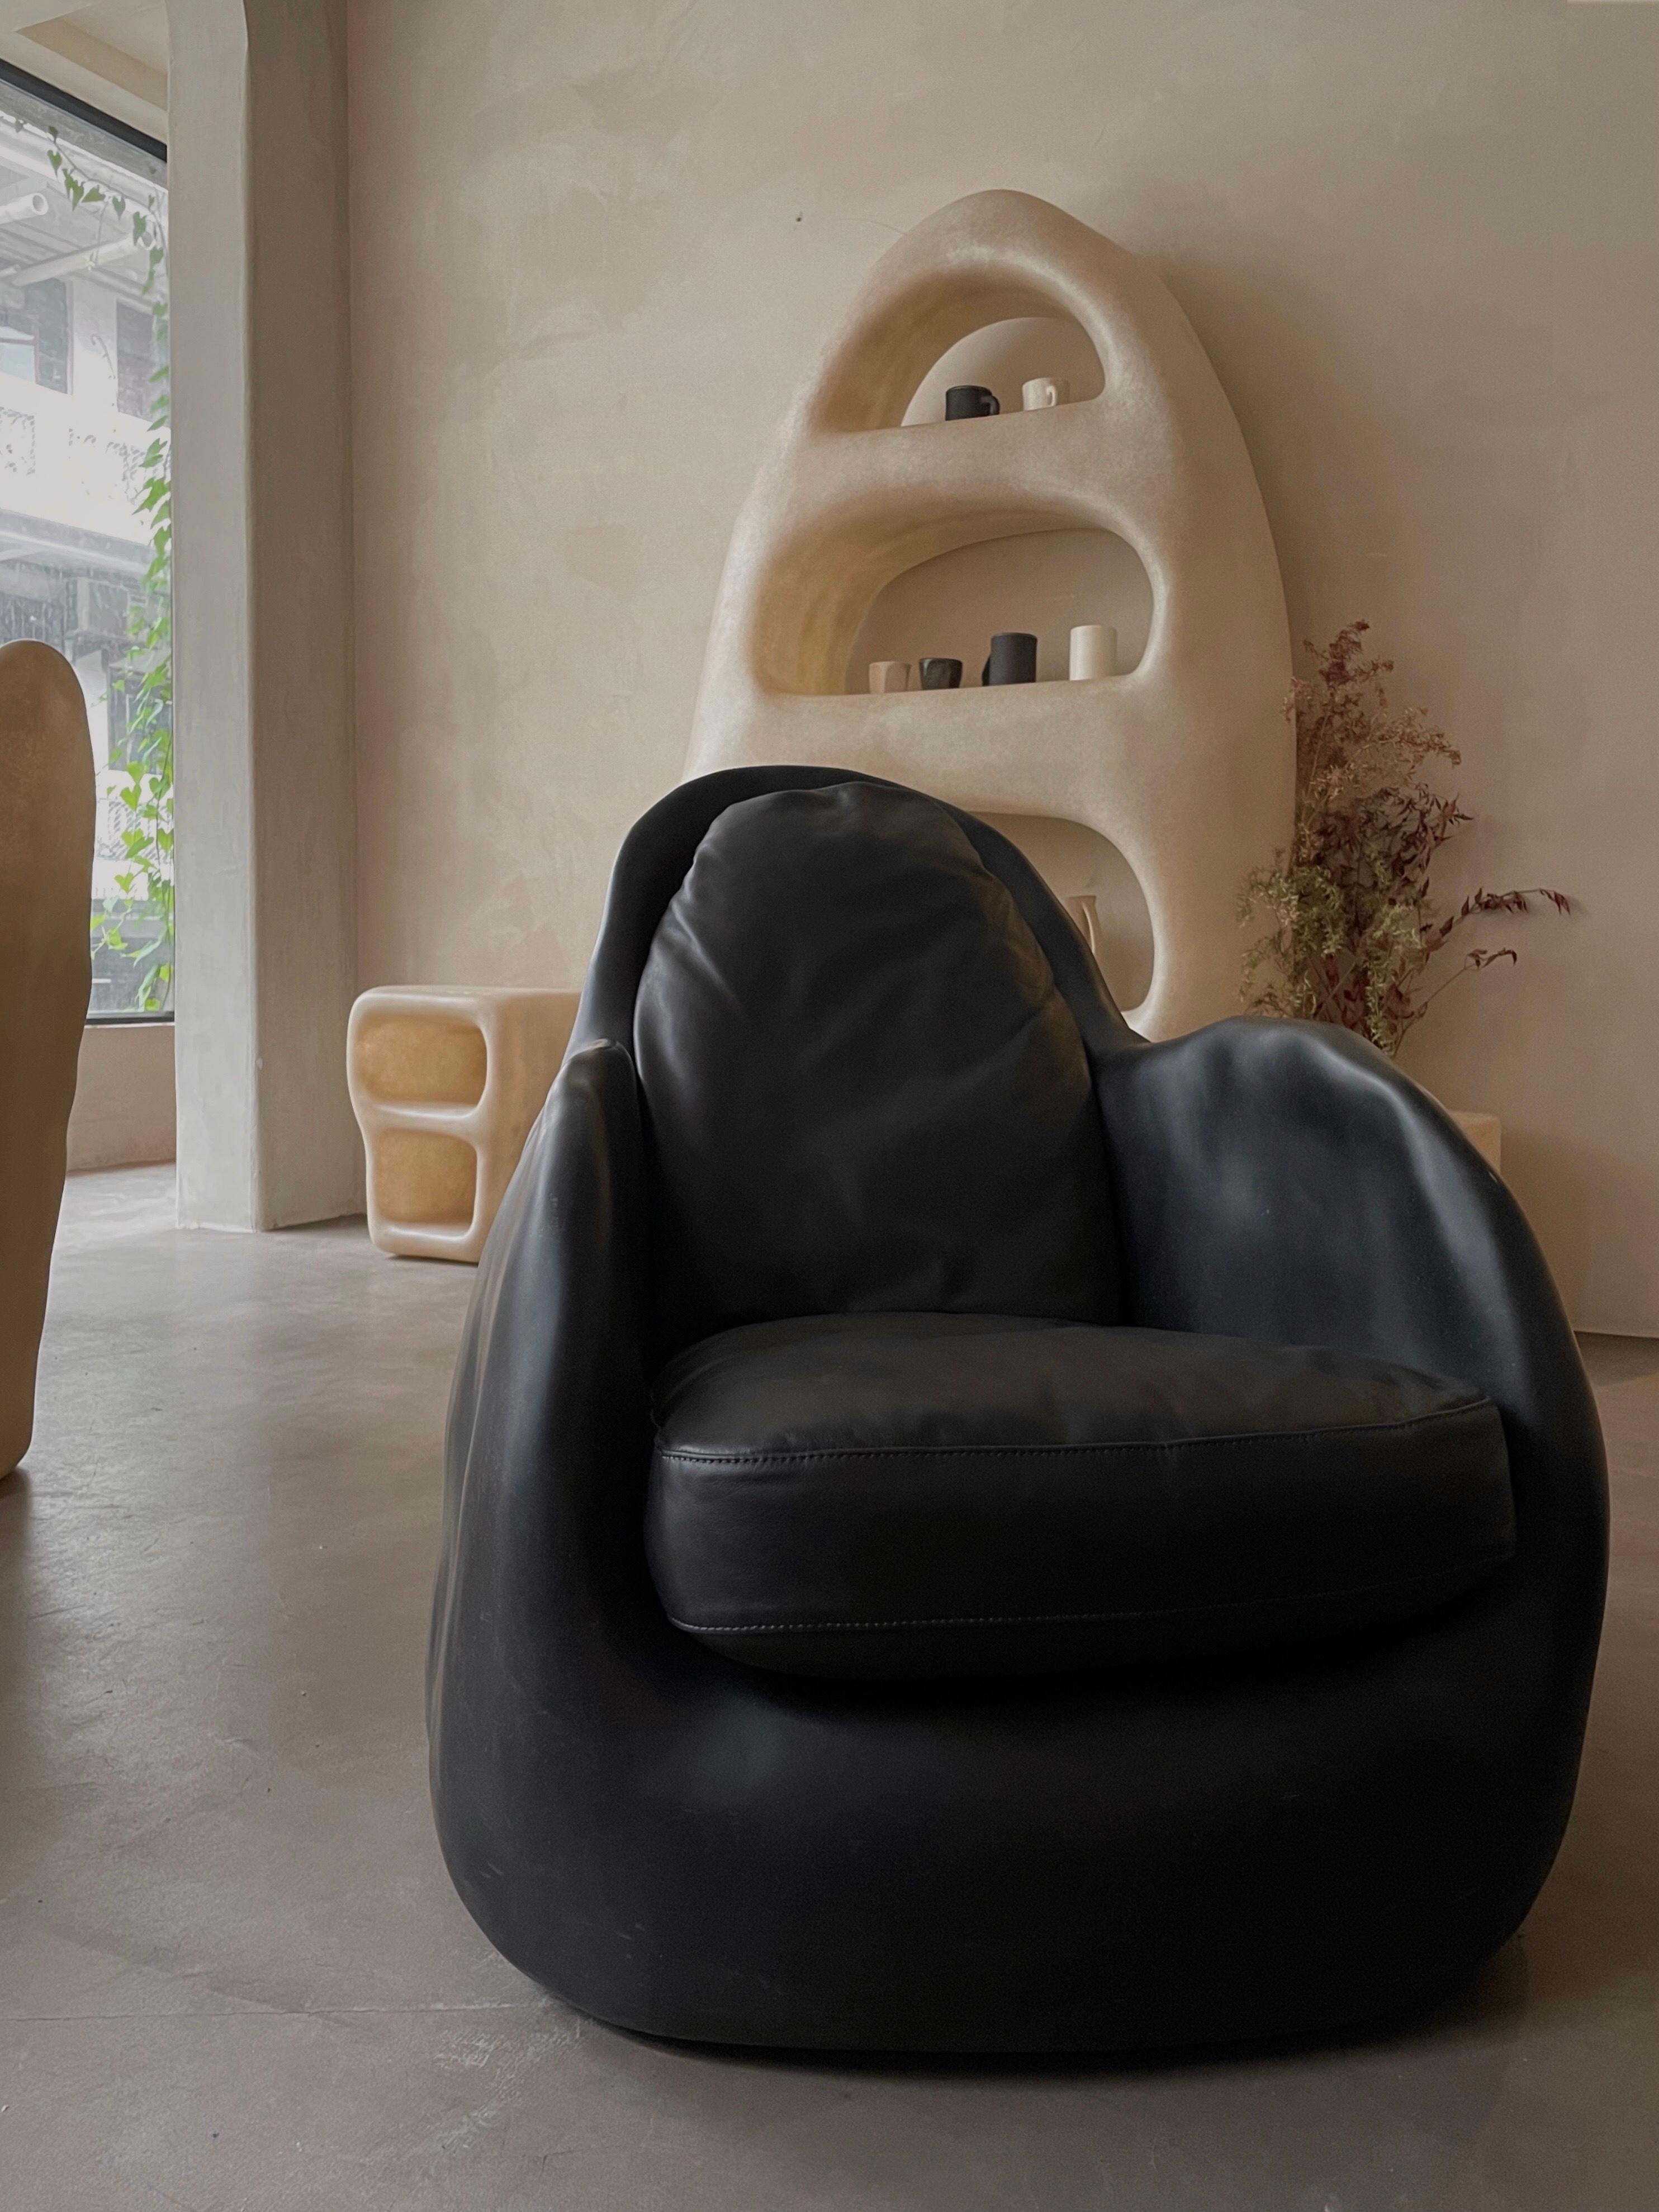 Knead Black Lounge by Karstudio.
Dimensions: W 75 x D 100 x H 78 cm.
Materials: FRP.
Available in white.

Kar, is the root of Sanskrit Karma, meaning karmic repetition. We seek the cause and effect in aesthetics, inspired from the past, the